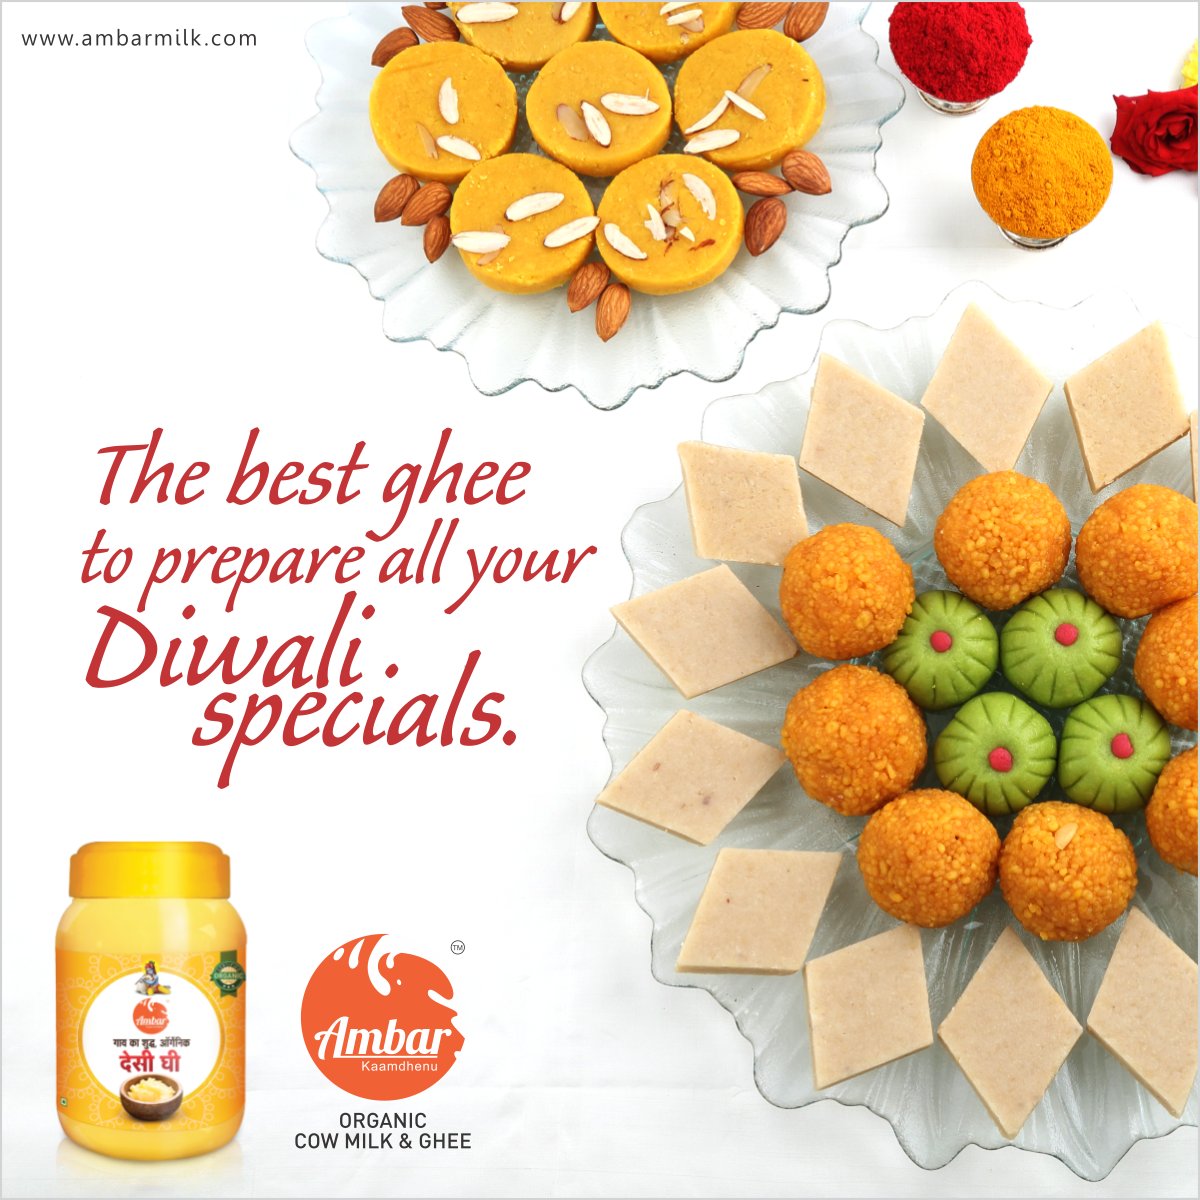 Your best delicacies deserve the best ghee. Prepare your #DeepawaliSweets and #Namkeens with #AmbarPure and #OrganicCowGhee for good health and excellent taste.
.
.
.
#AmbarMilk #AmbarMilkDewas #Dewas #Indore #AmbarGhee #AmbarDairy #DesiGhee #ClarifiedButter #ShudhGhee